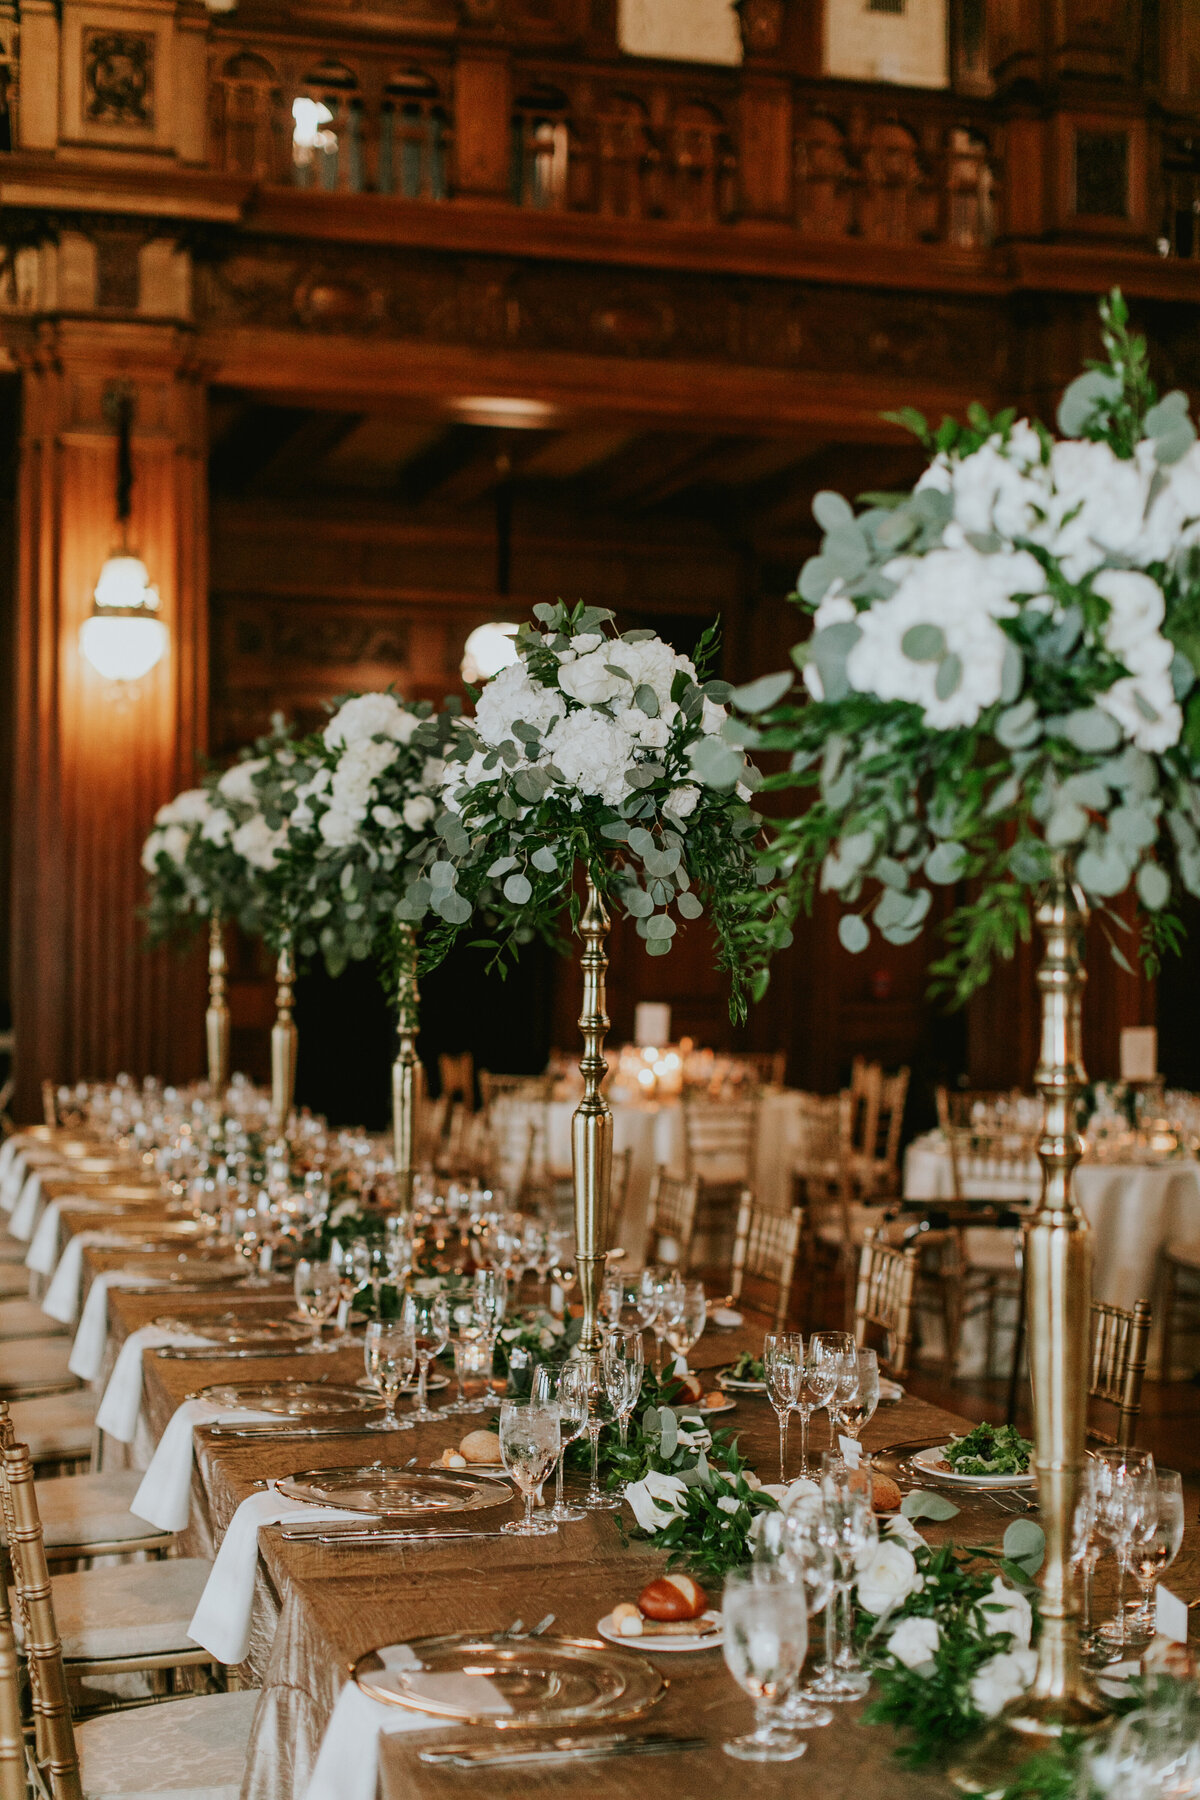 Head table at wedding with decor and flowers